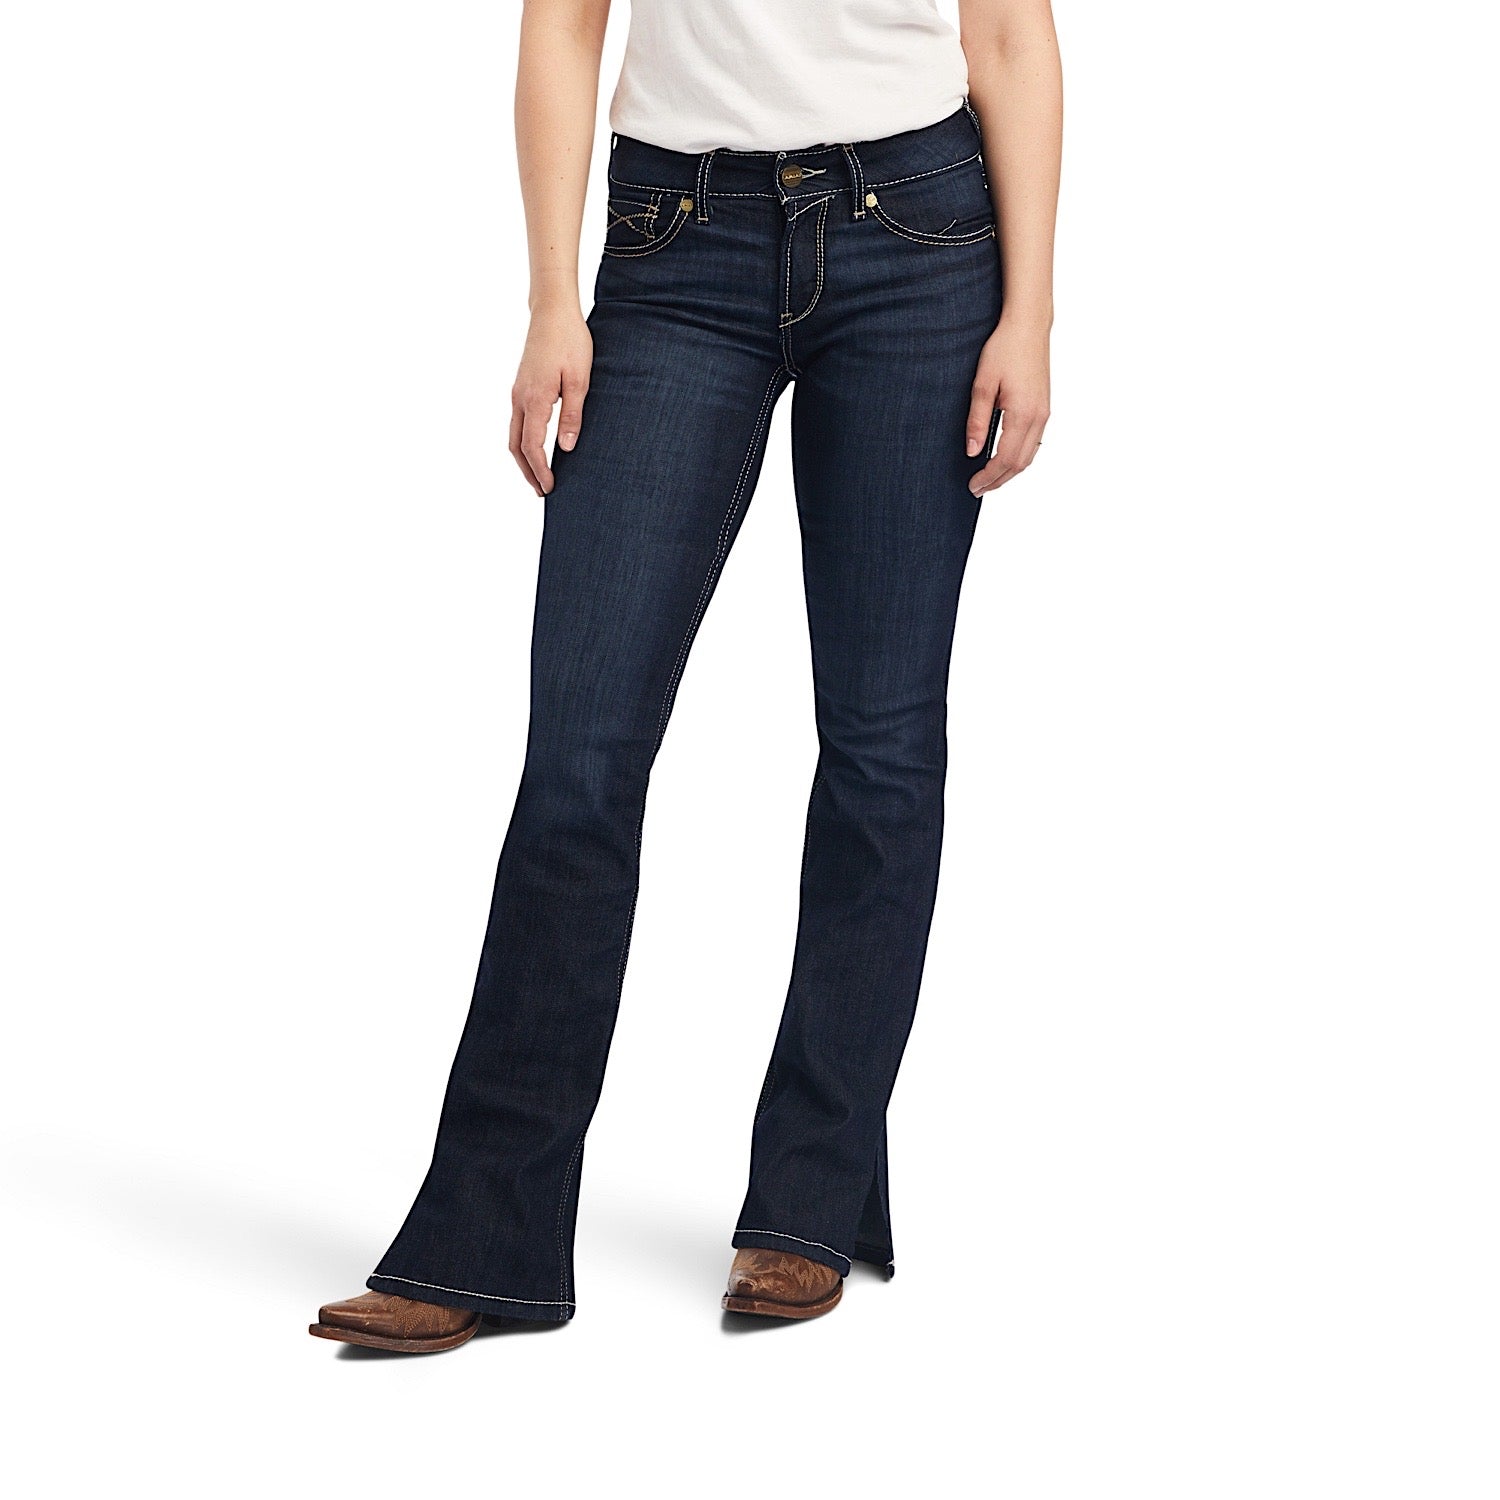 Ariat REAL Jeans for Women